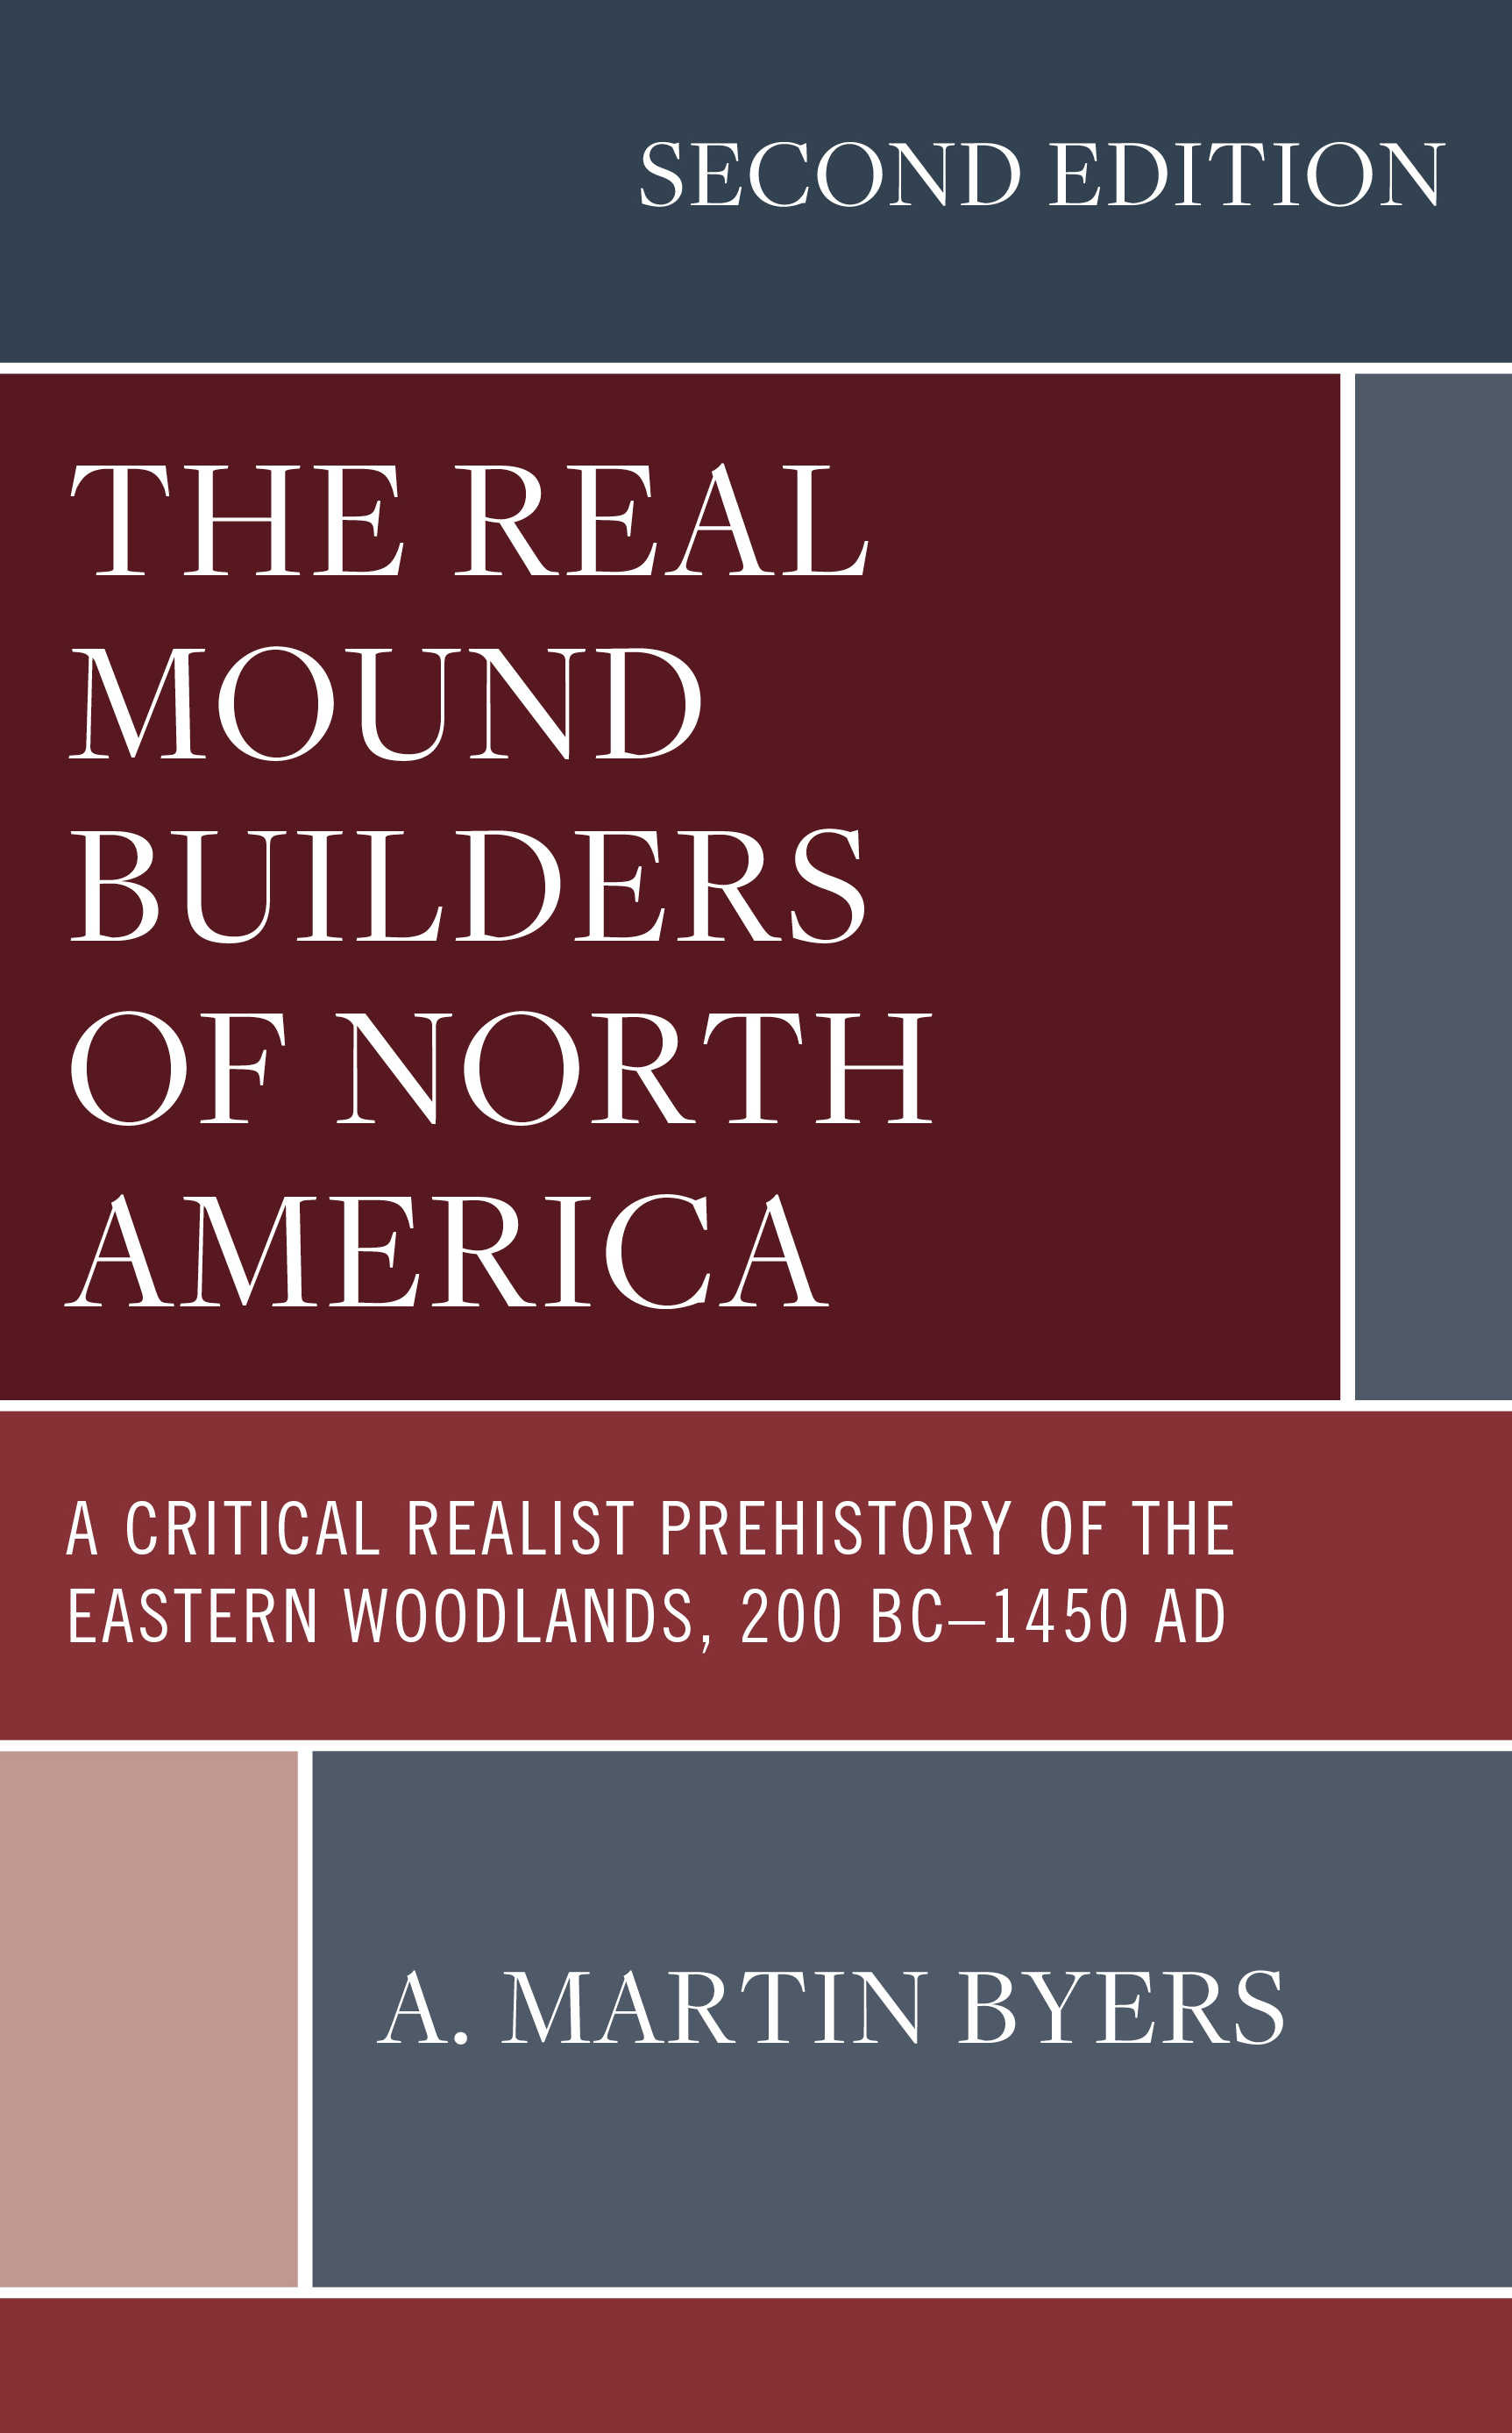 The Real Mound Builders of North America: A Critical Realist Prehistory of the Eastern Woodlands, 200 BC–1450 AD